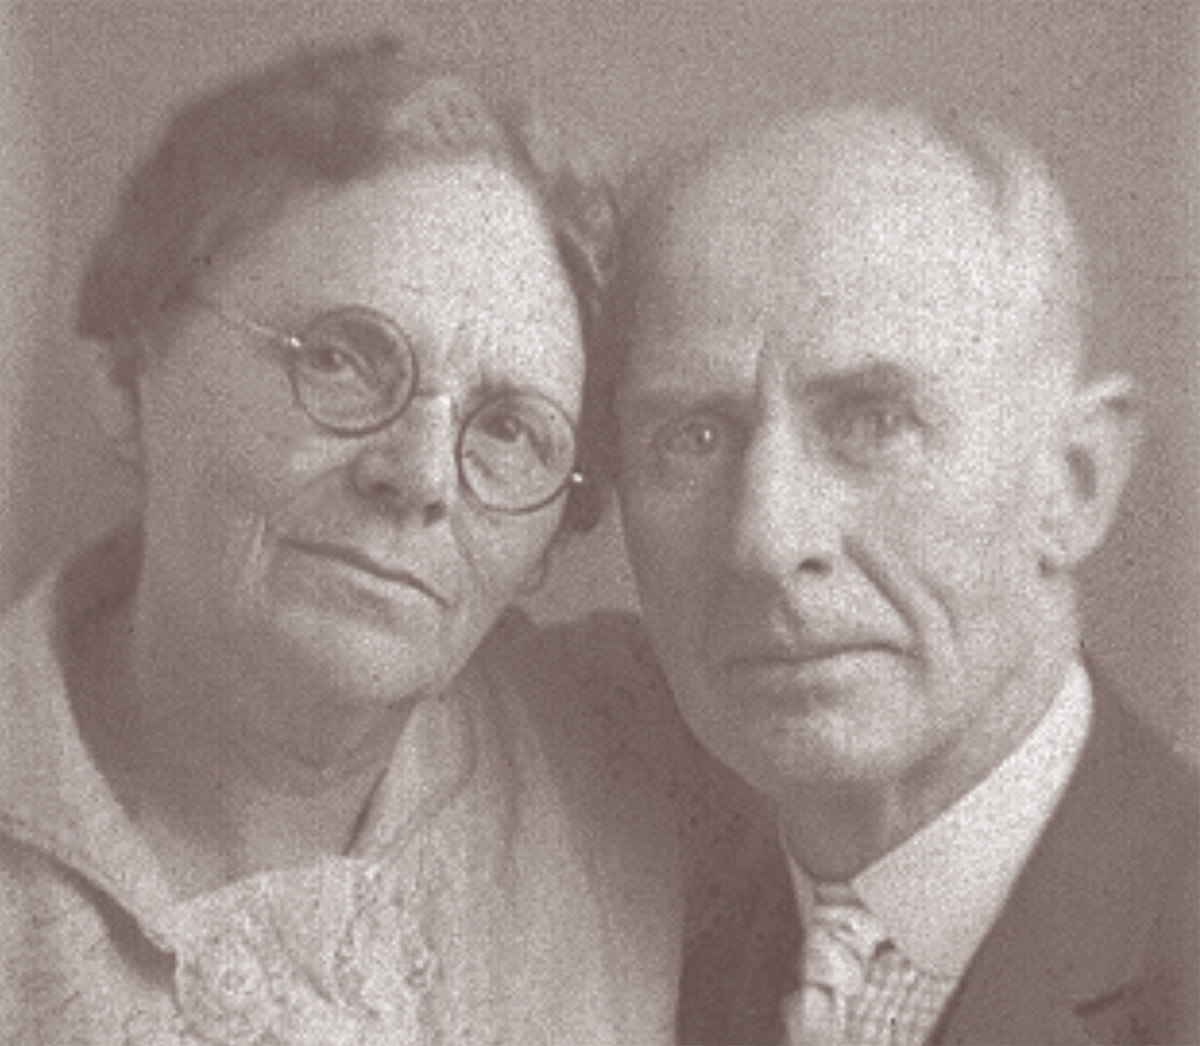 Fred and Nora Chambers